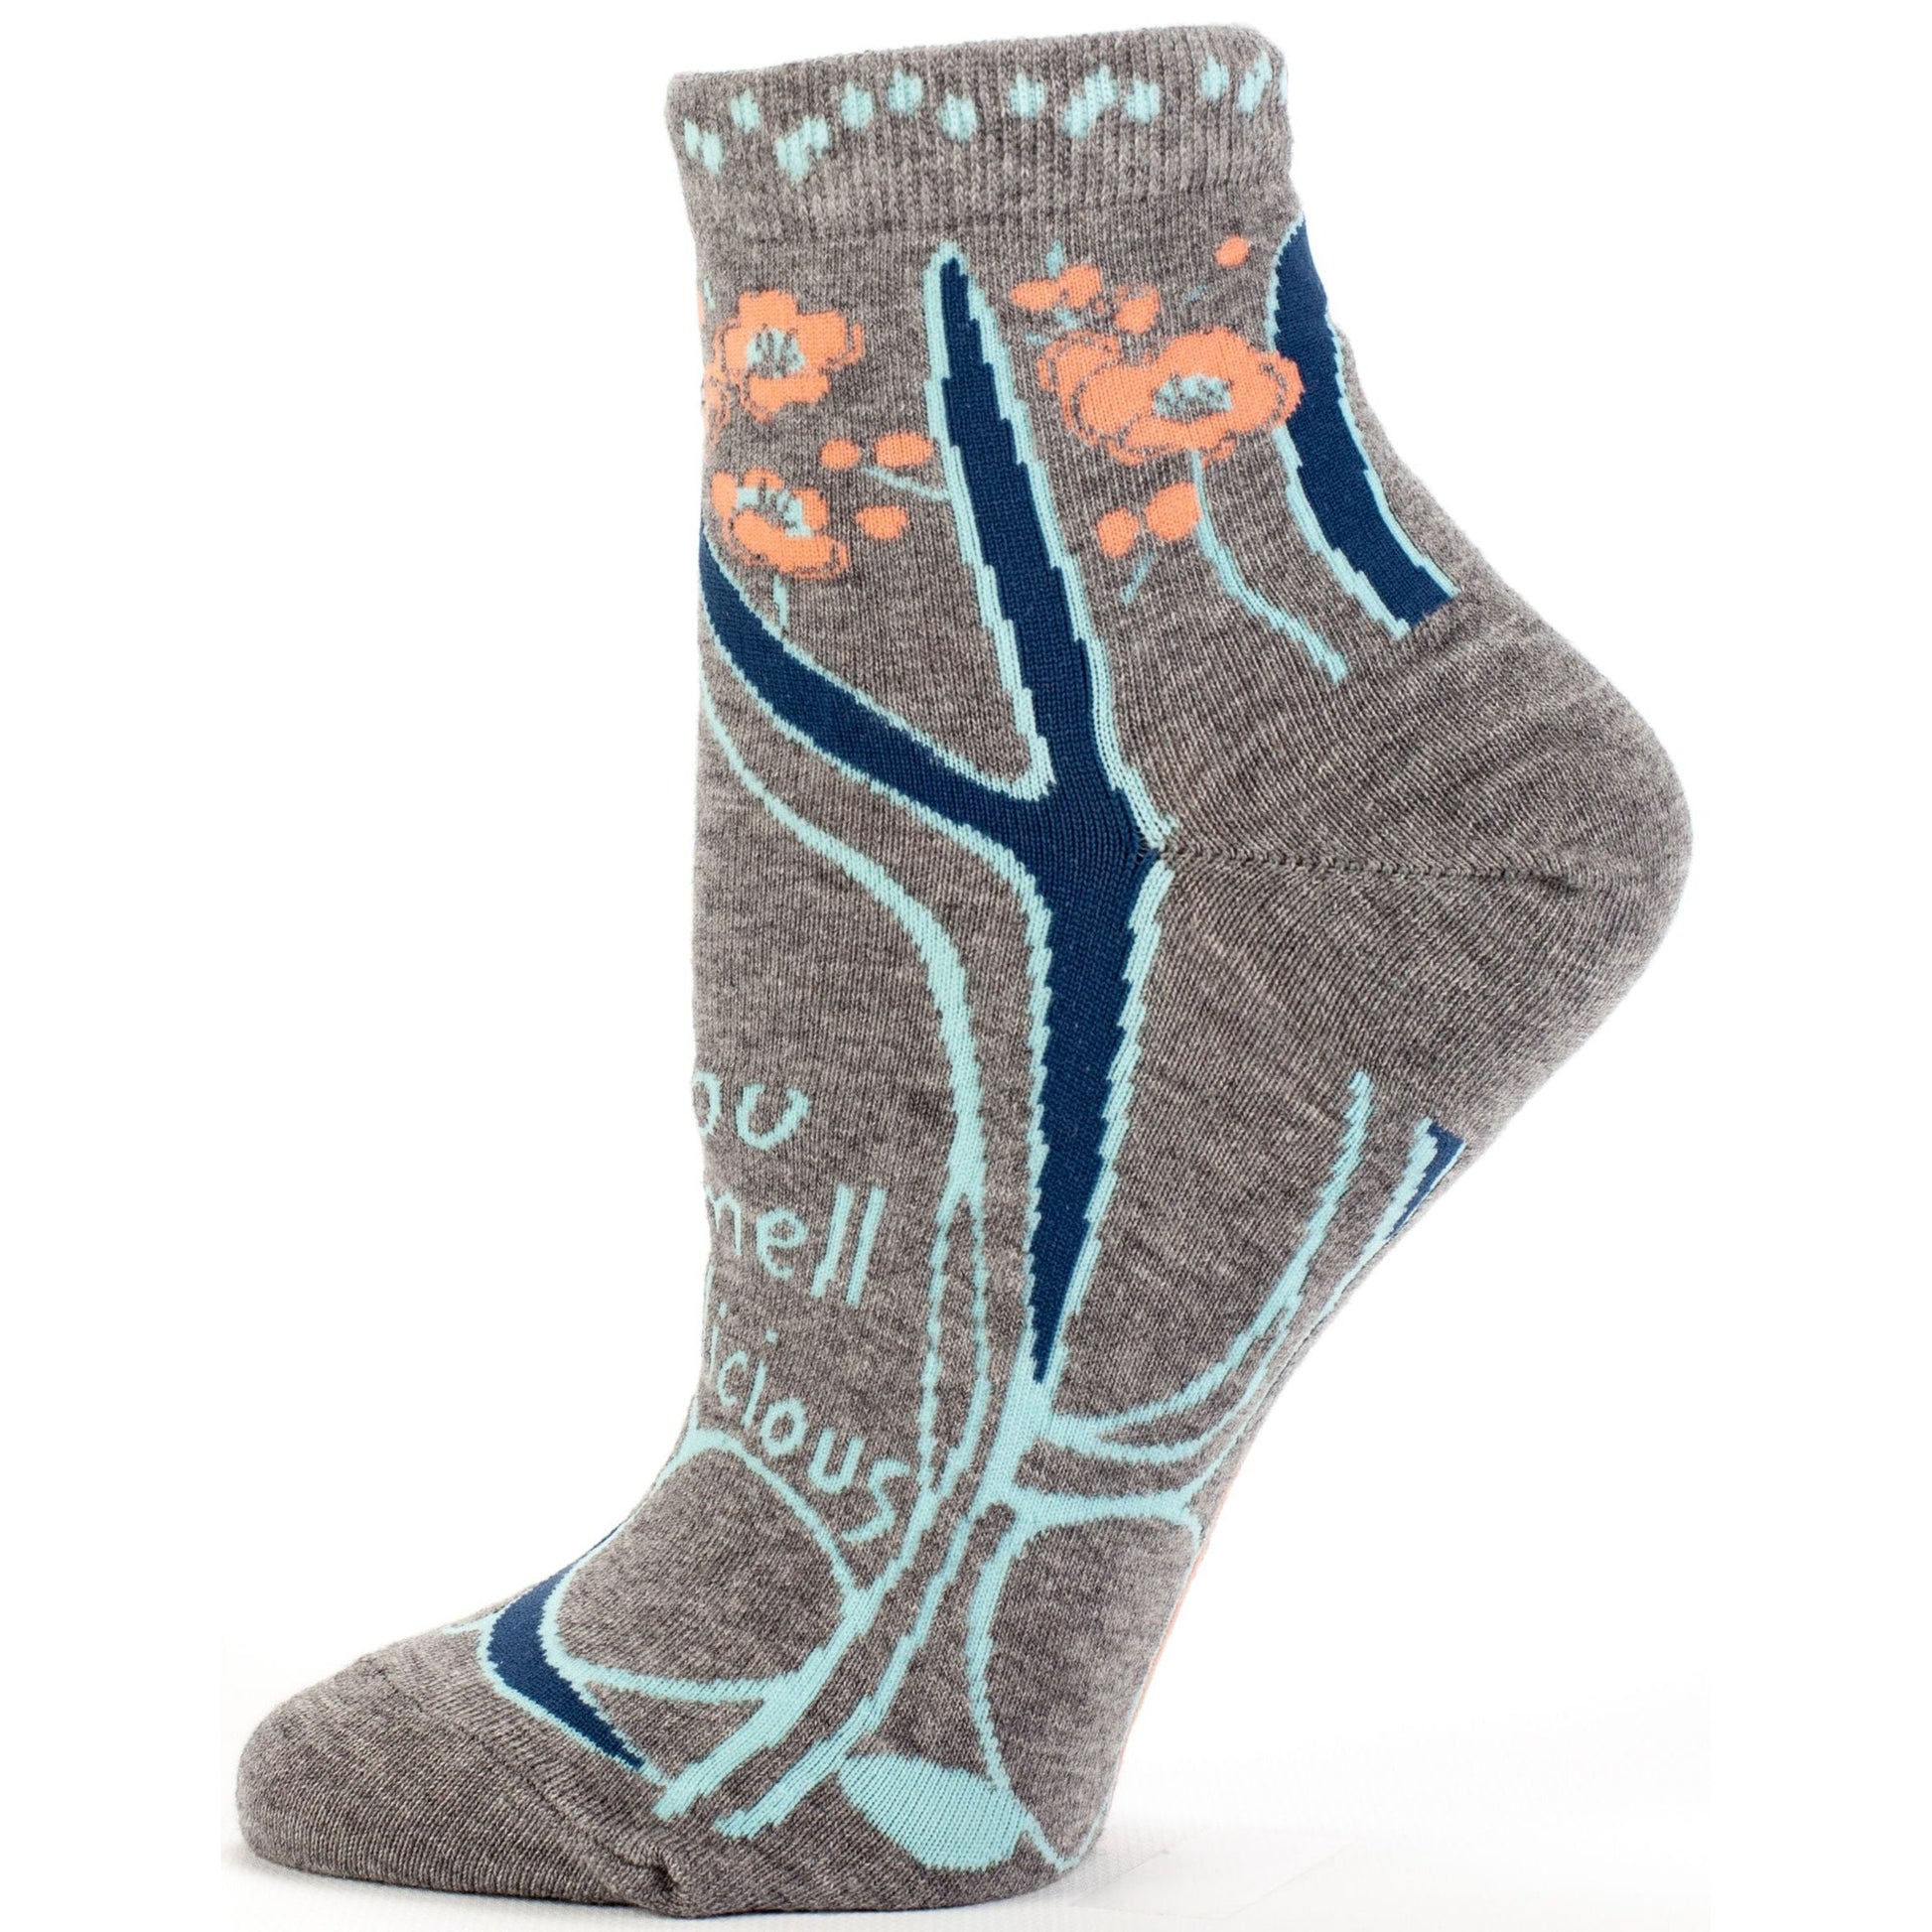 You Smell Delicious Women's Quirky Ankle Socks